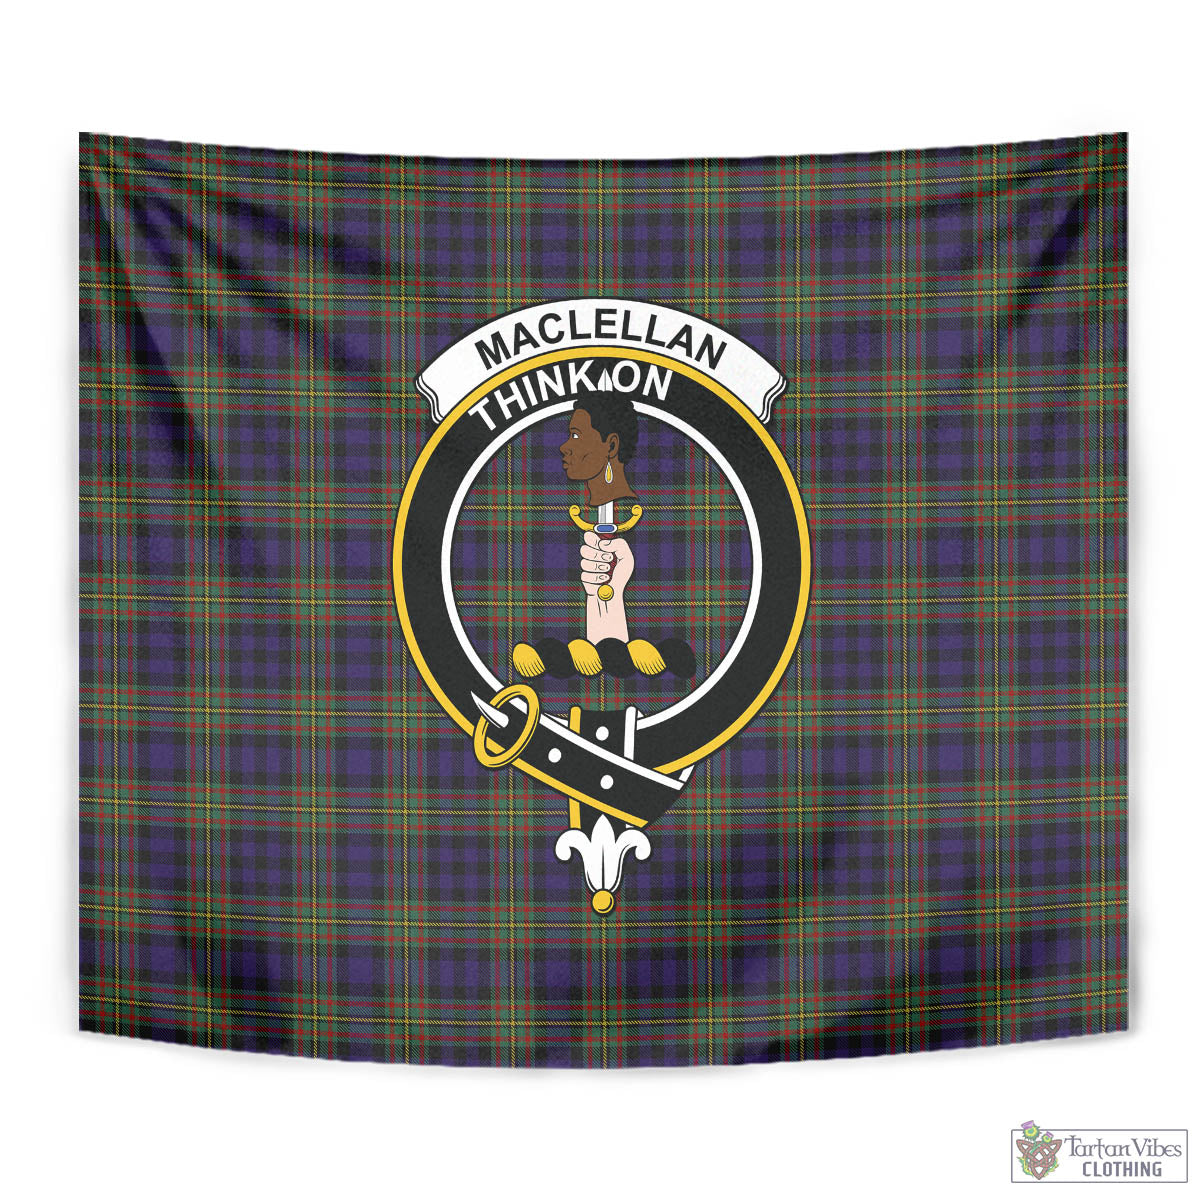 Tartan Vibes Clothing MacLellan Tartan Tapestry Wall Hanging and Home Decor for Room with Family Crest